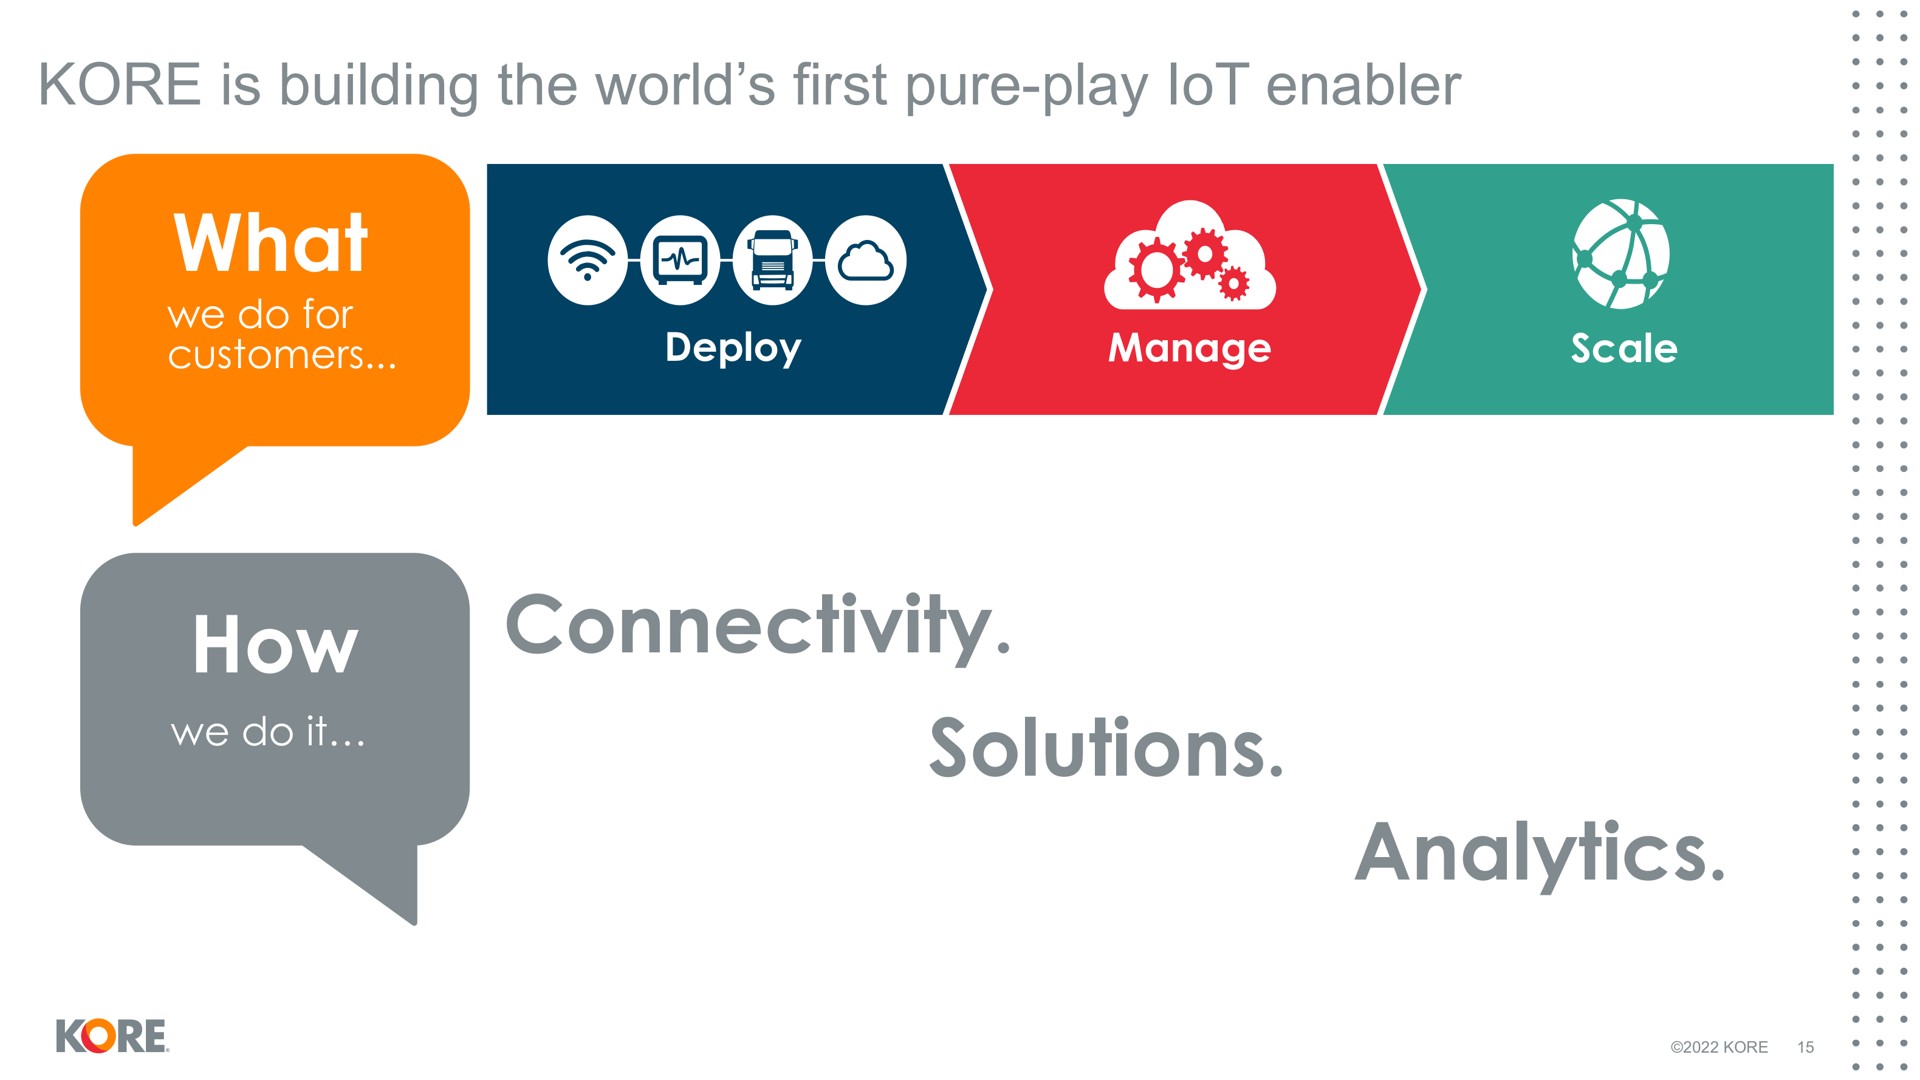 kore is building the world first pure play enabler what how connectivity solutions analytics lot tae we do it | Kore